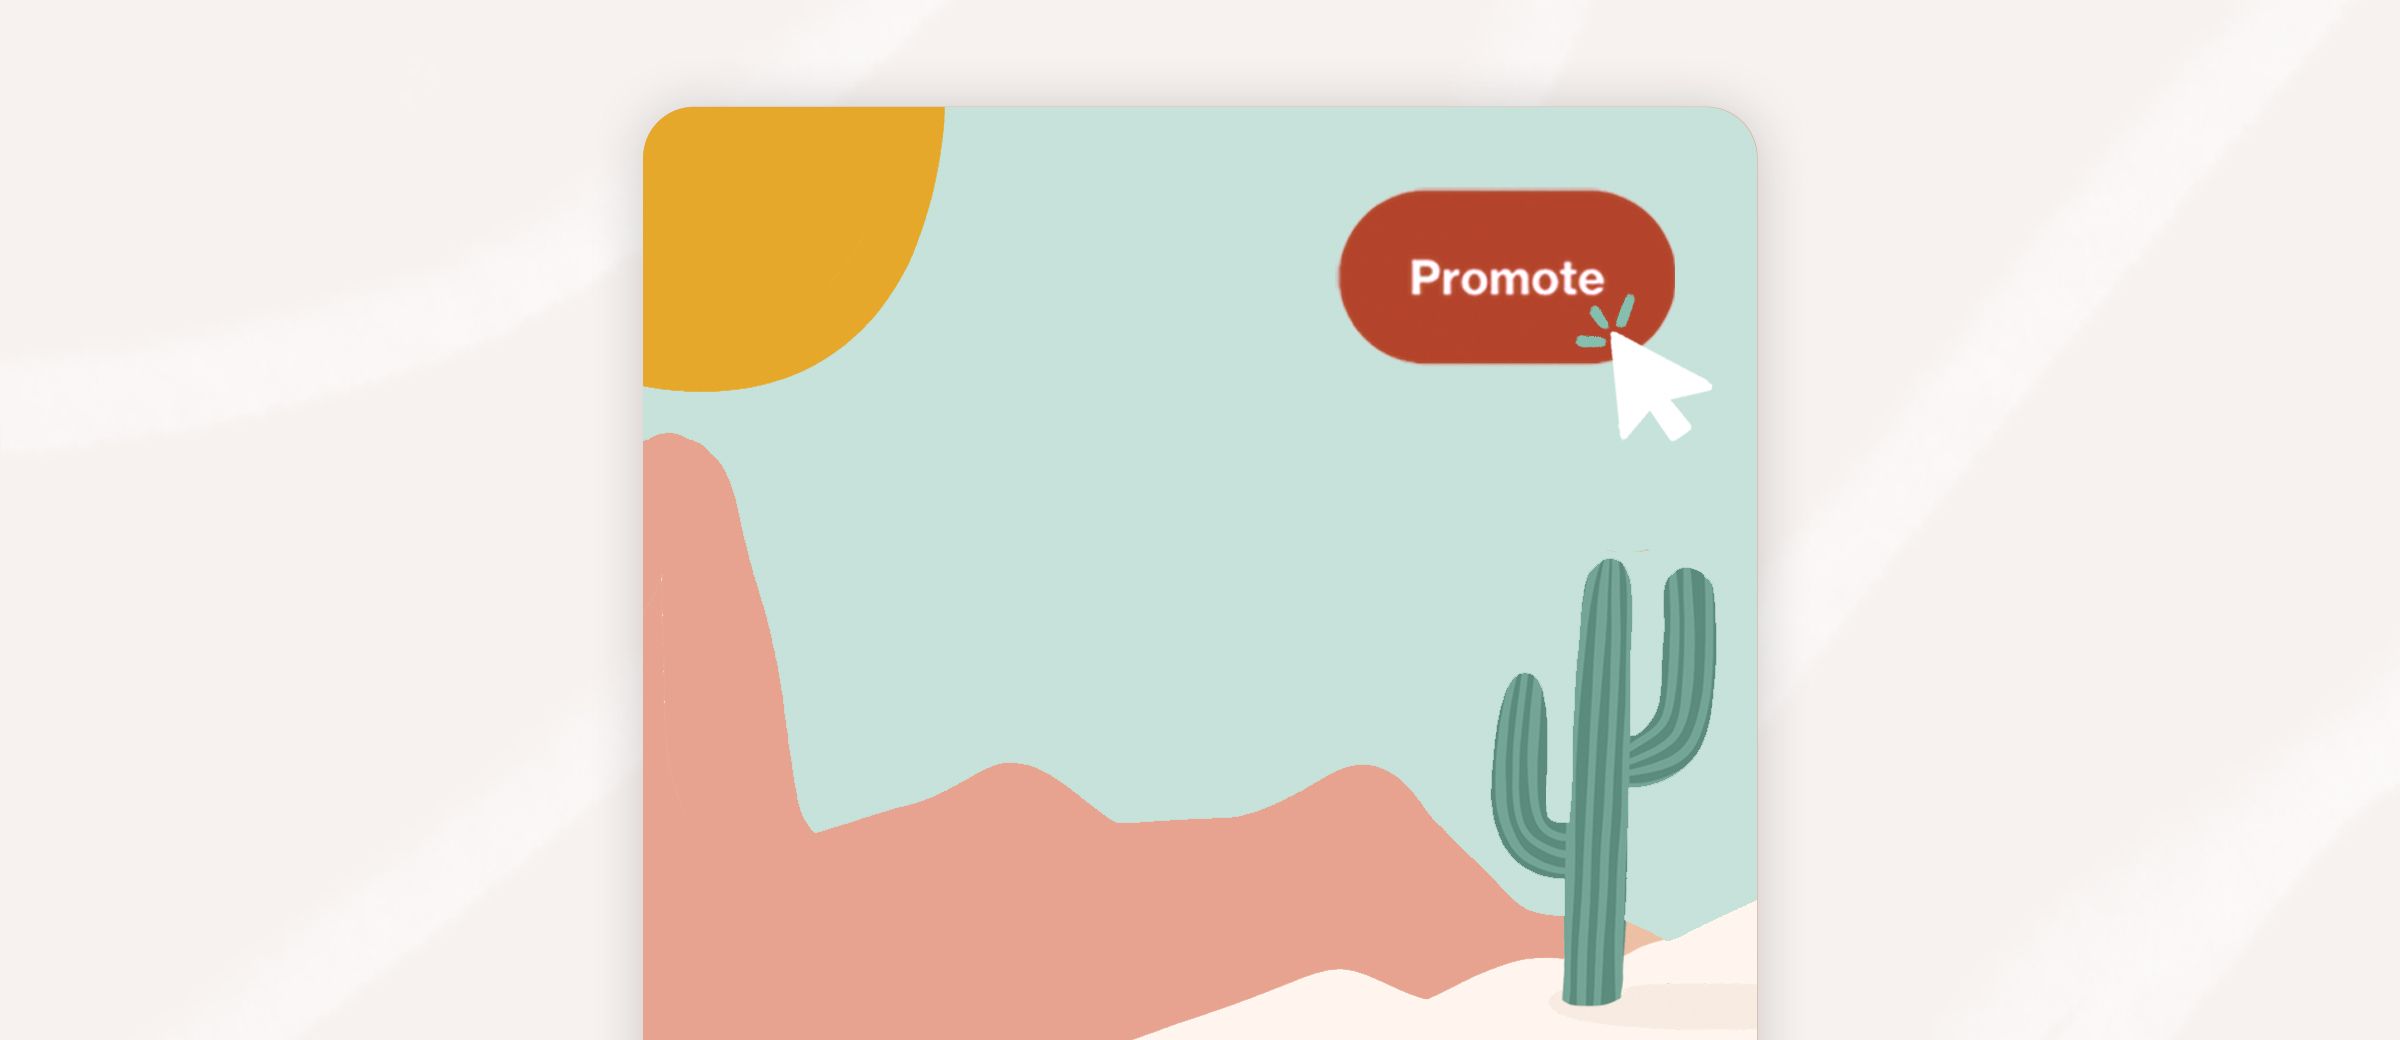 Read about How to Get Started With Pinterest Ads, on PLANOLY